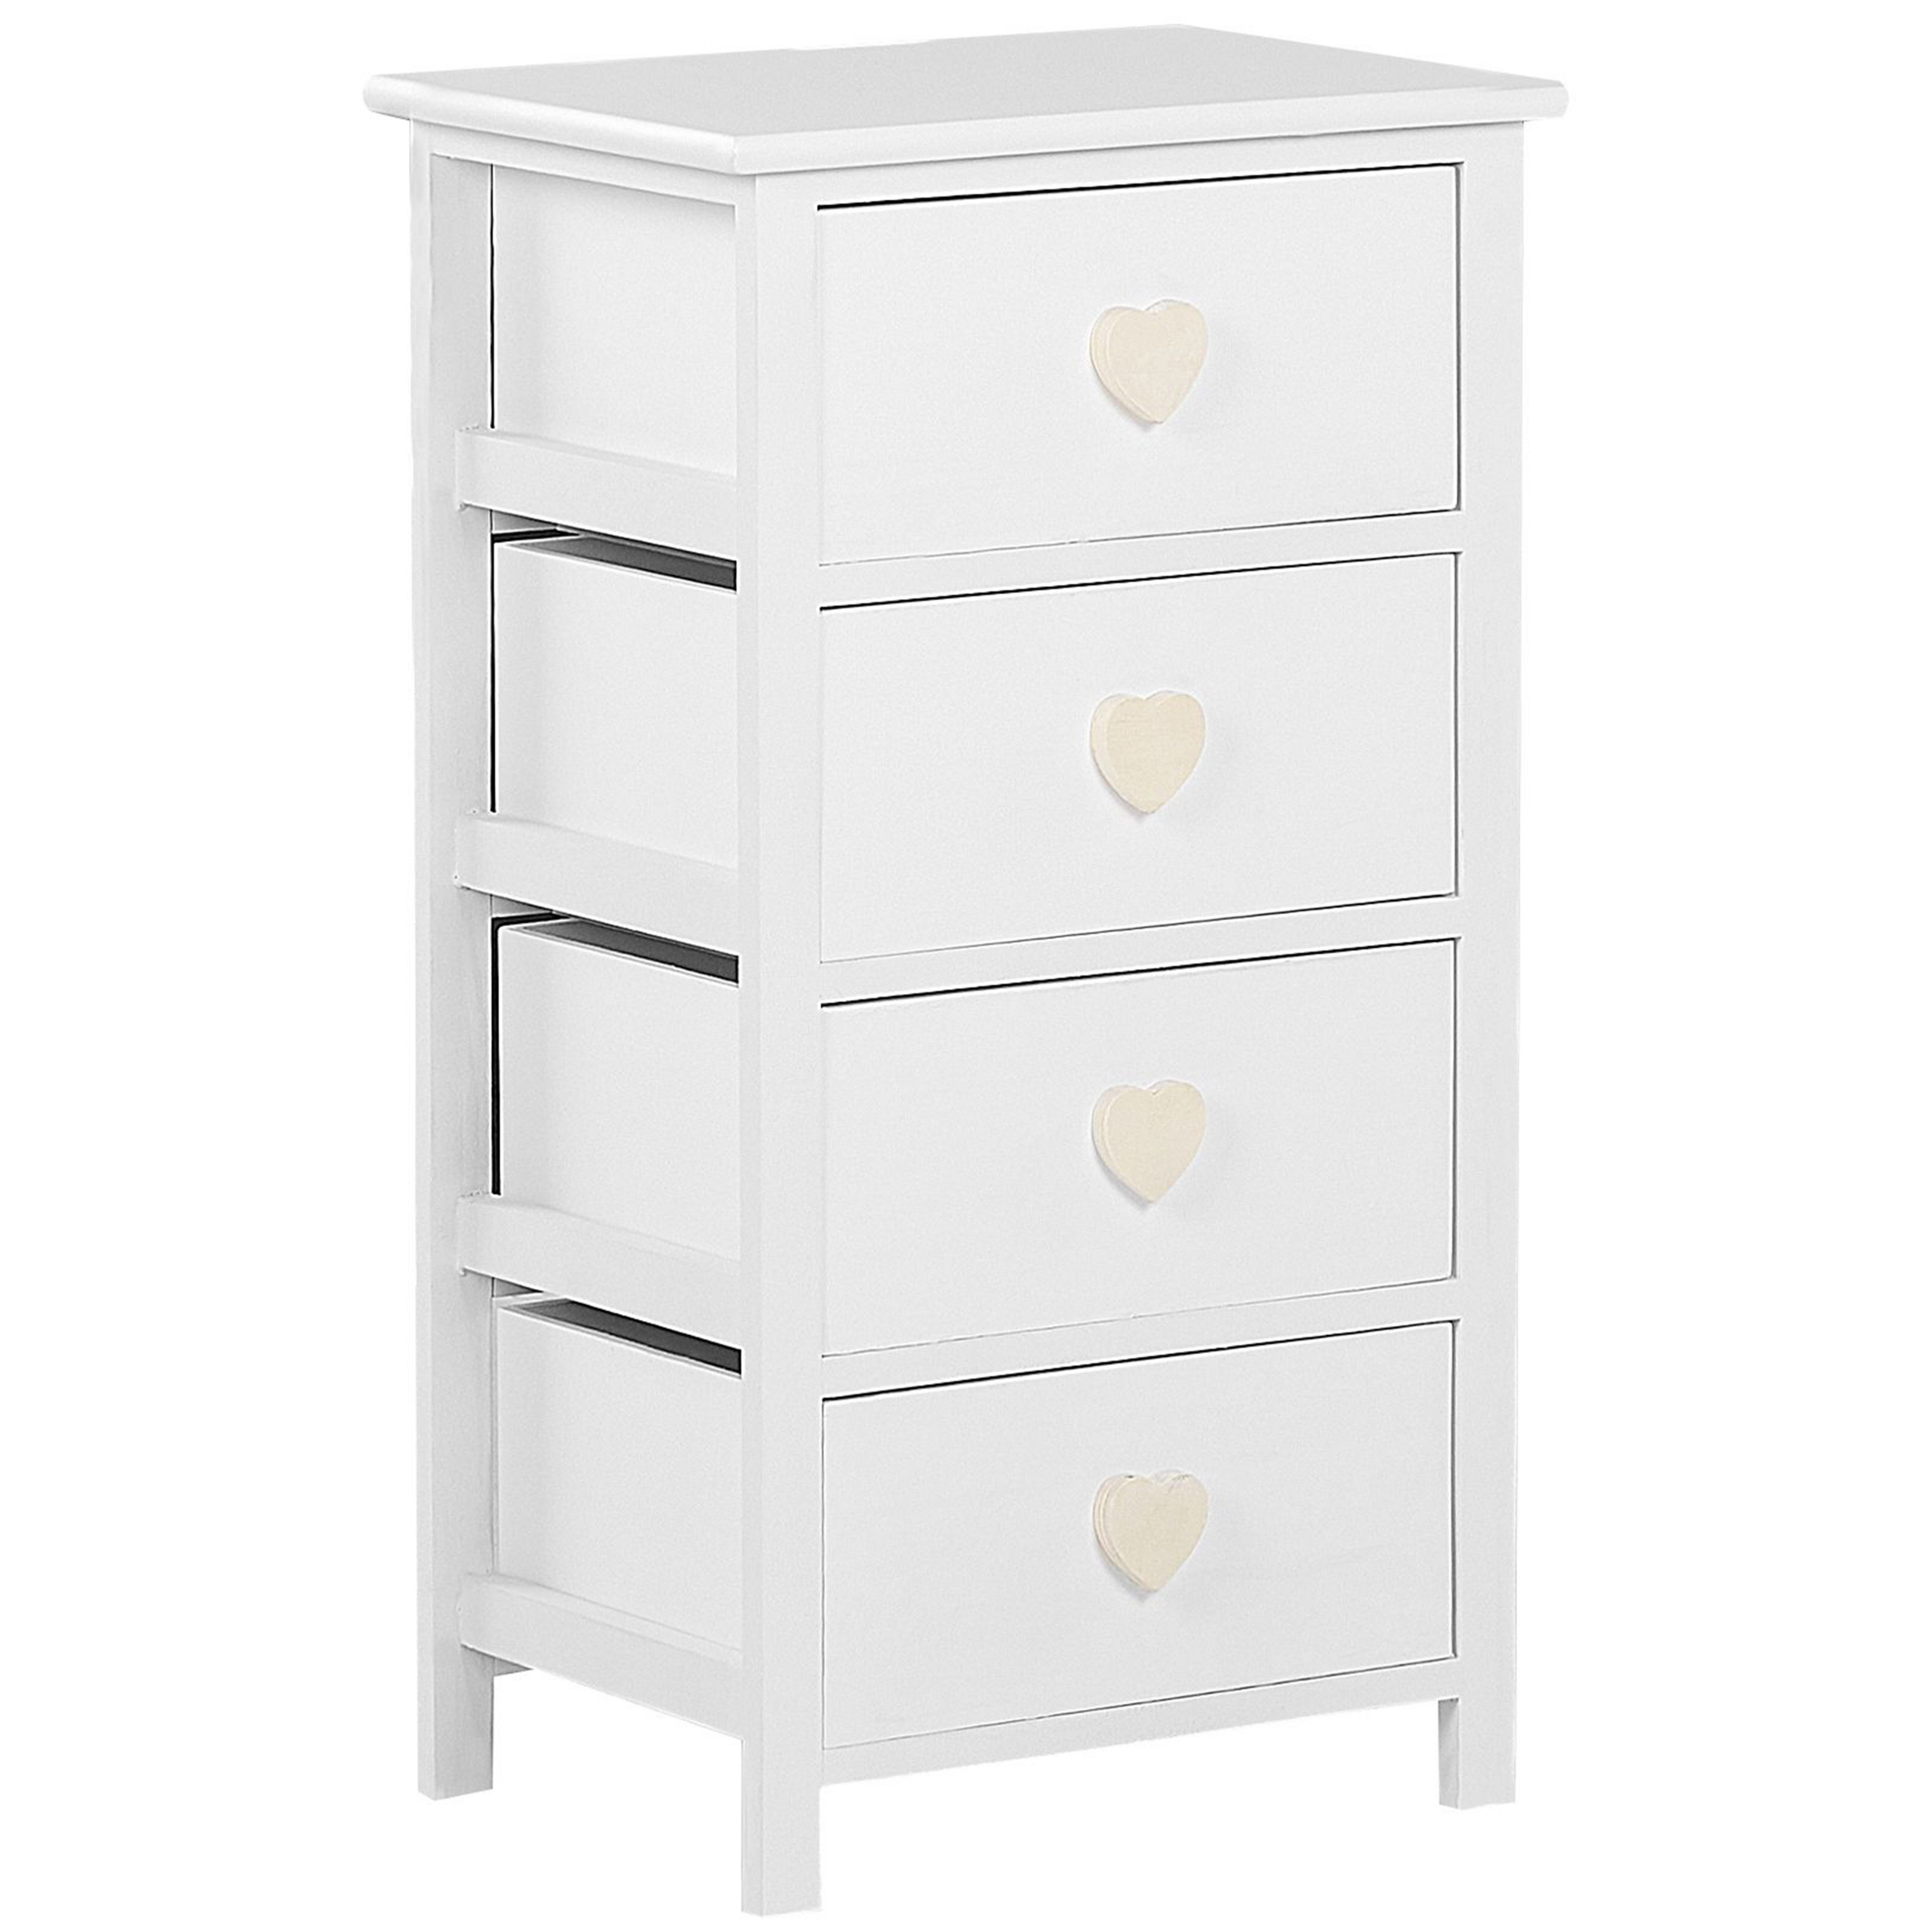 Beliani Chest of Drawers White Plywood 73 x 40 cm 4 Drawer Tower Storage Unit for Kids Scandinavian Style Bedroom Children's Room Furniture